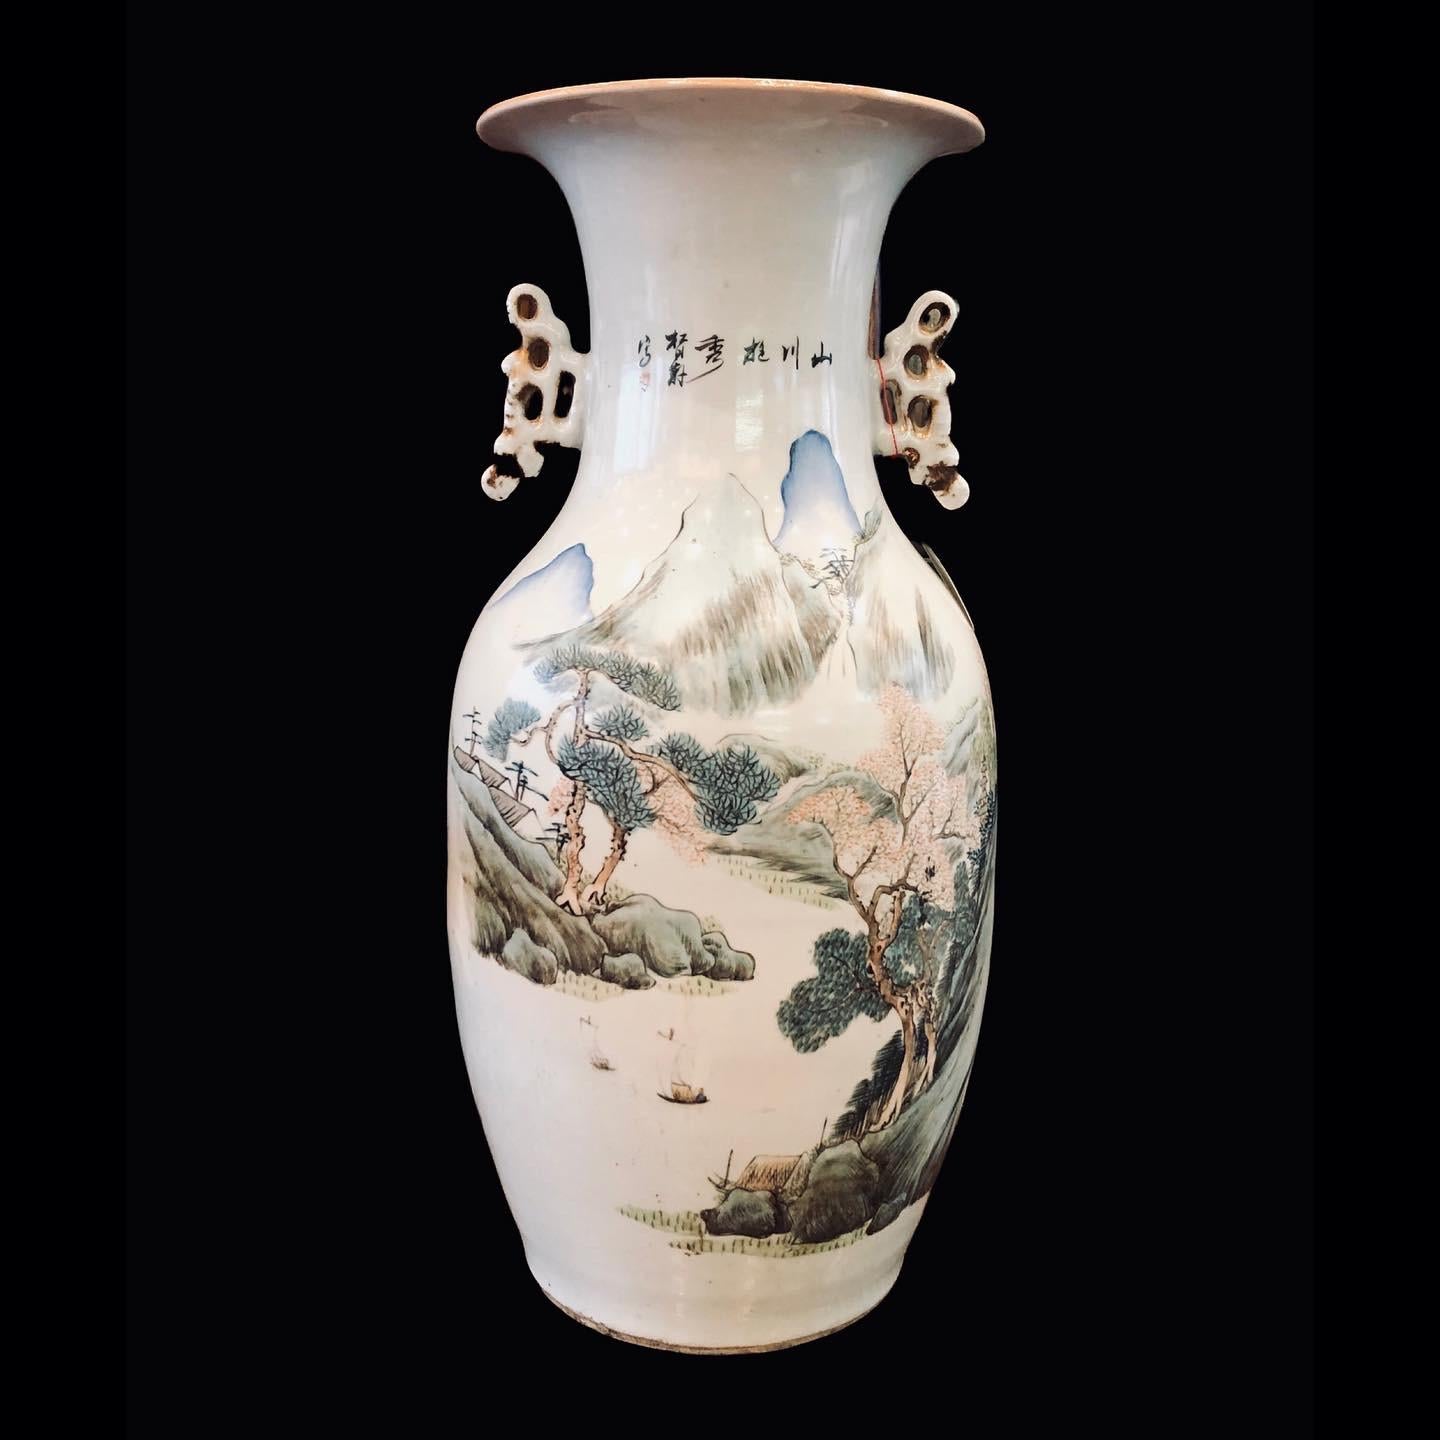 20th Century Chinese Porcelain Vase - Song Yue Xuan Signed - 1925 For Sale